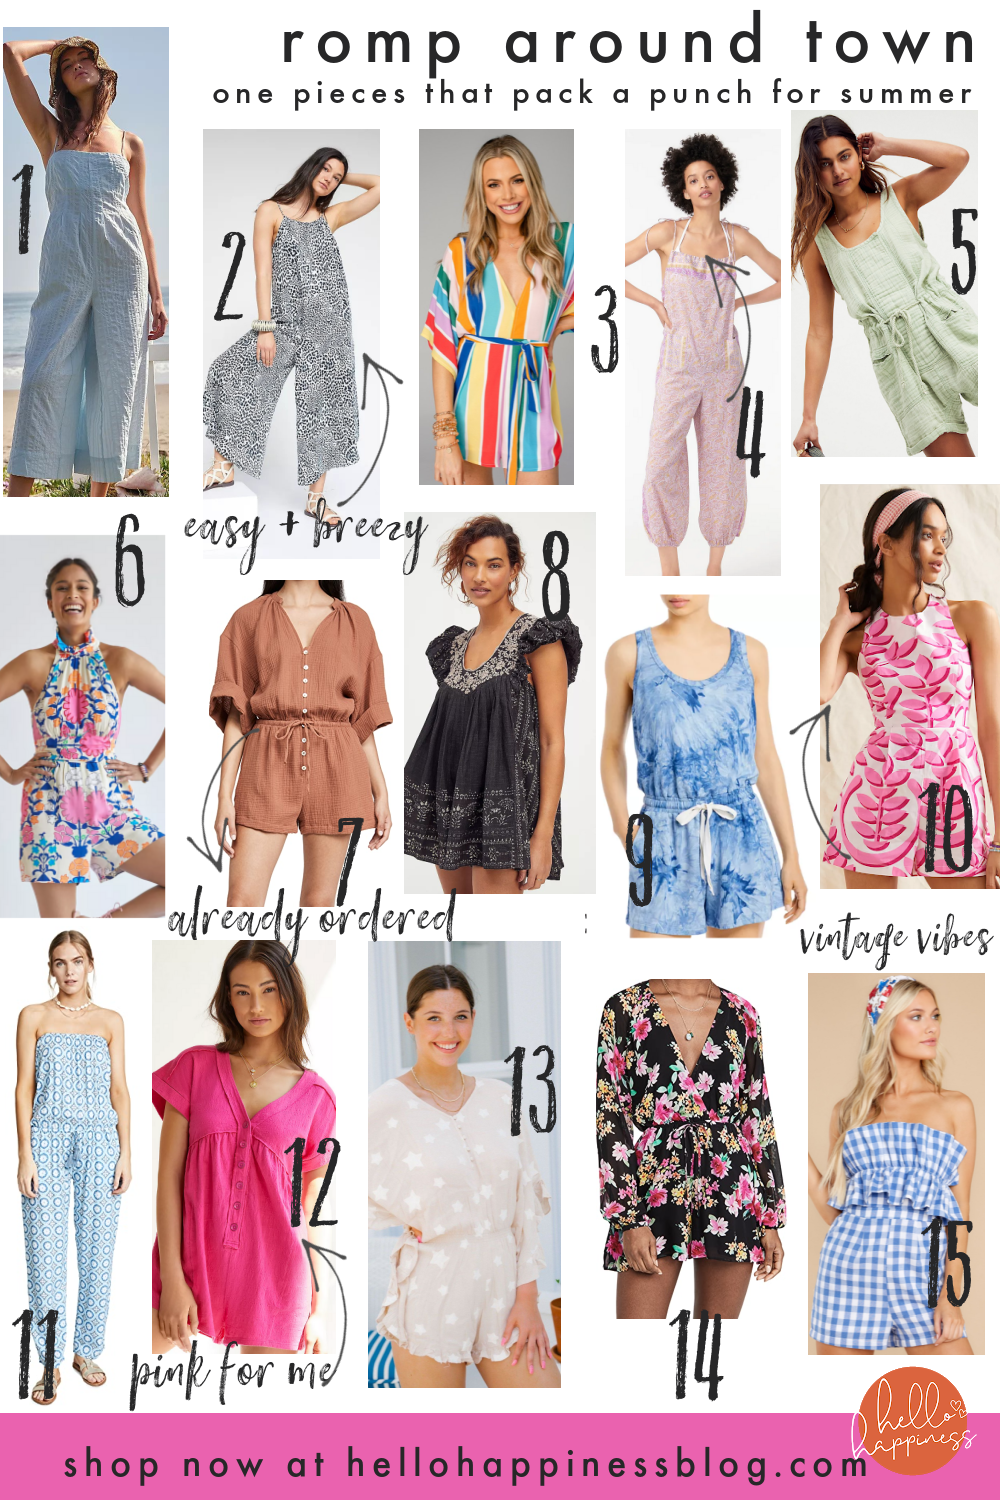 Rompers and Jumpers by popular Nashville fashion blog, Hello Happiness: collage image of a Devon white jumpsuit, breezy wide leg jumpsuit, fiesta romper, cotton voile jumpsuit, laguna shortall, ruffled floral rompers, zephyr gauze romper, cutie pie romper, aqua tie dye romper, pleated cut-out romper, Jenny jumpsuit, Daily practice lounge romper, star gazer romper, Naomi romper, and gingham romper. 